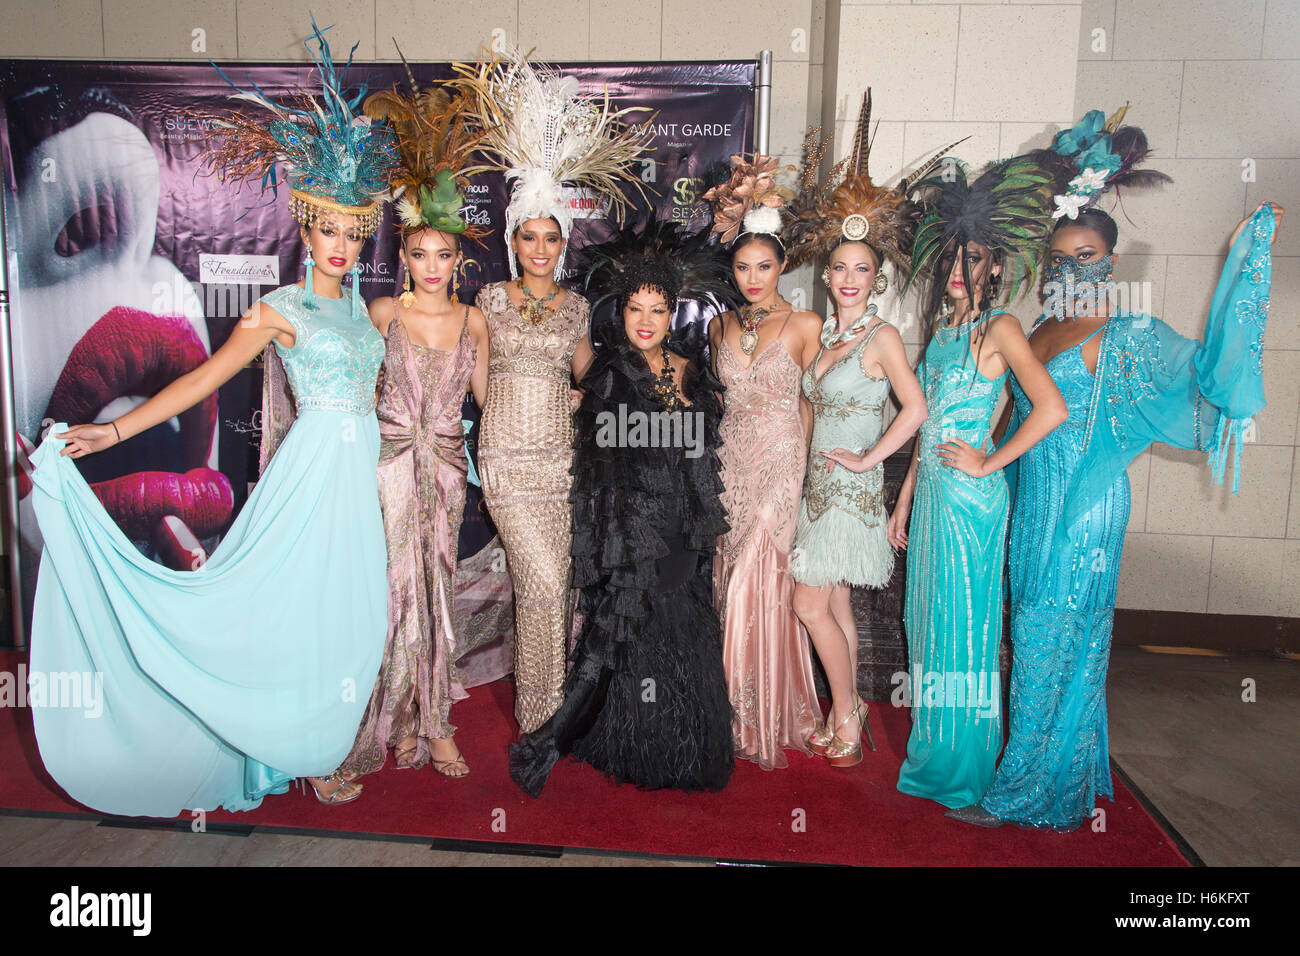 Los Angeles, California USA. 29th October, 2016. Fashion designer Sue Wong and models attend Avant Garde Magazine's 2nd Annual Masquerade Ball 2016 held at The Majestic Downtown LA in Los Angeles, California USA. @ Sheri Determan / Alamy Live News Stock Photo